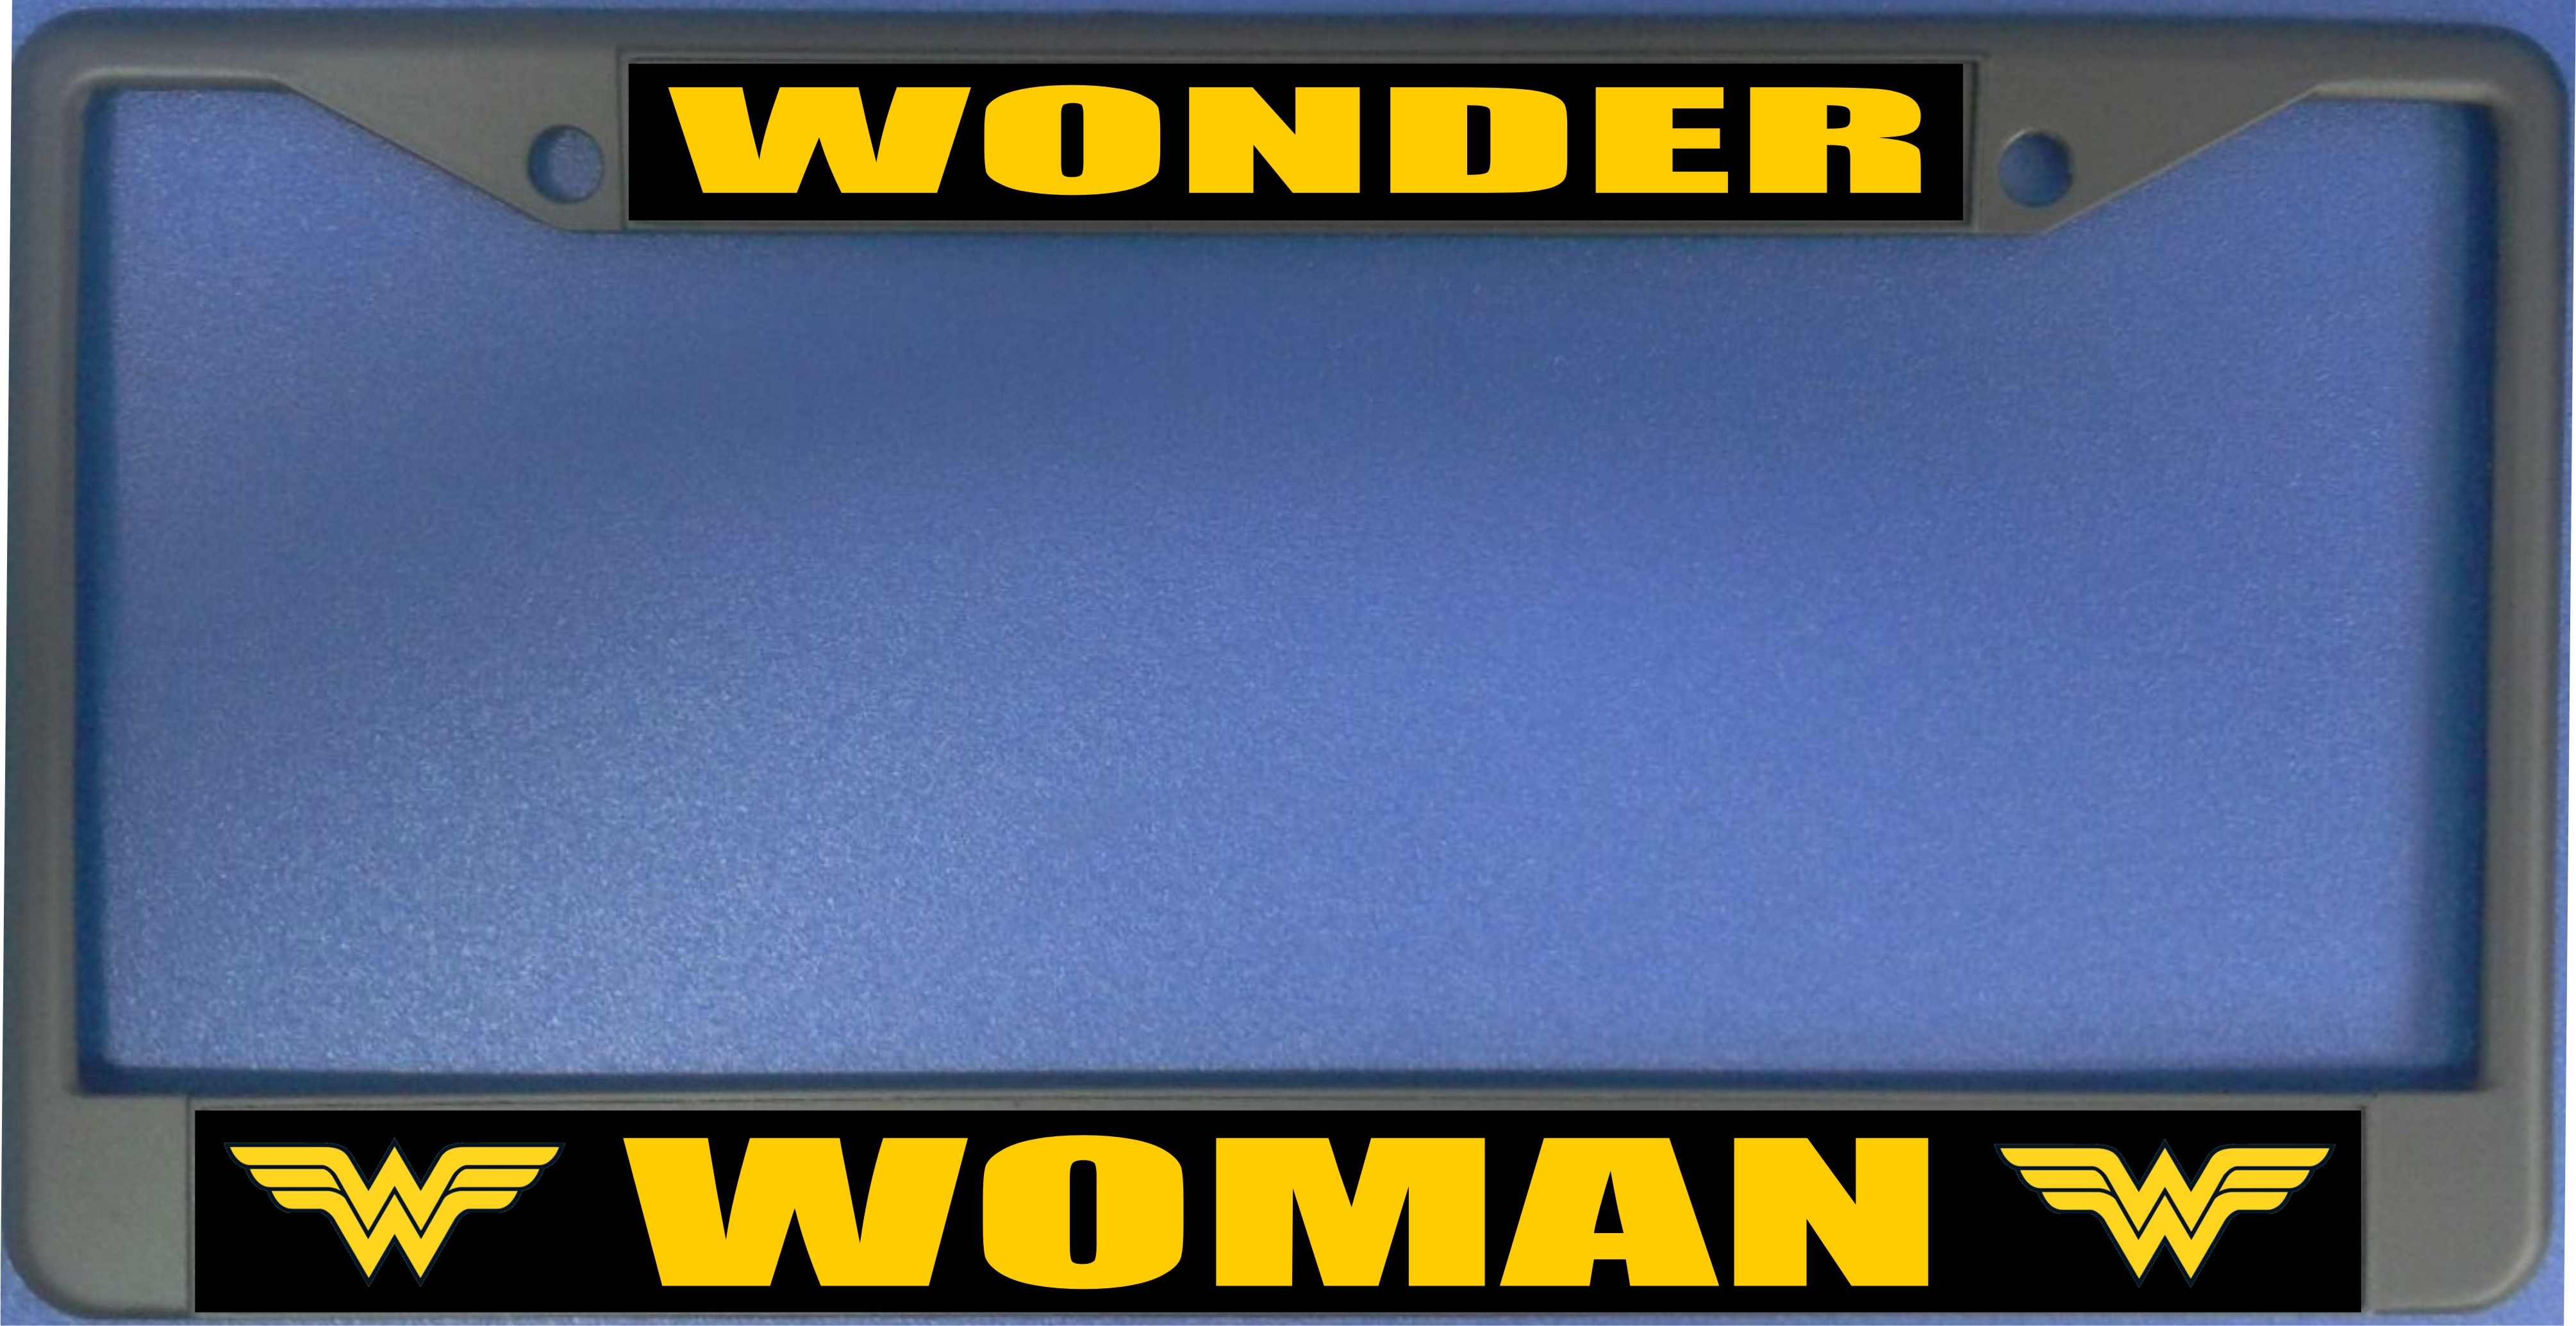 Wonder Woman On Black Photo LICENSE PLATE Frame Free Screw Caps with this Frame